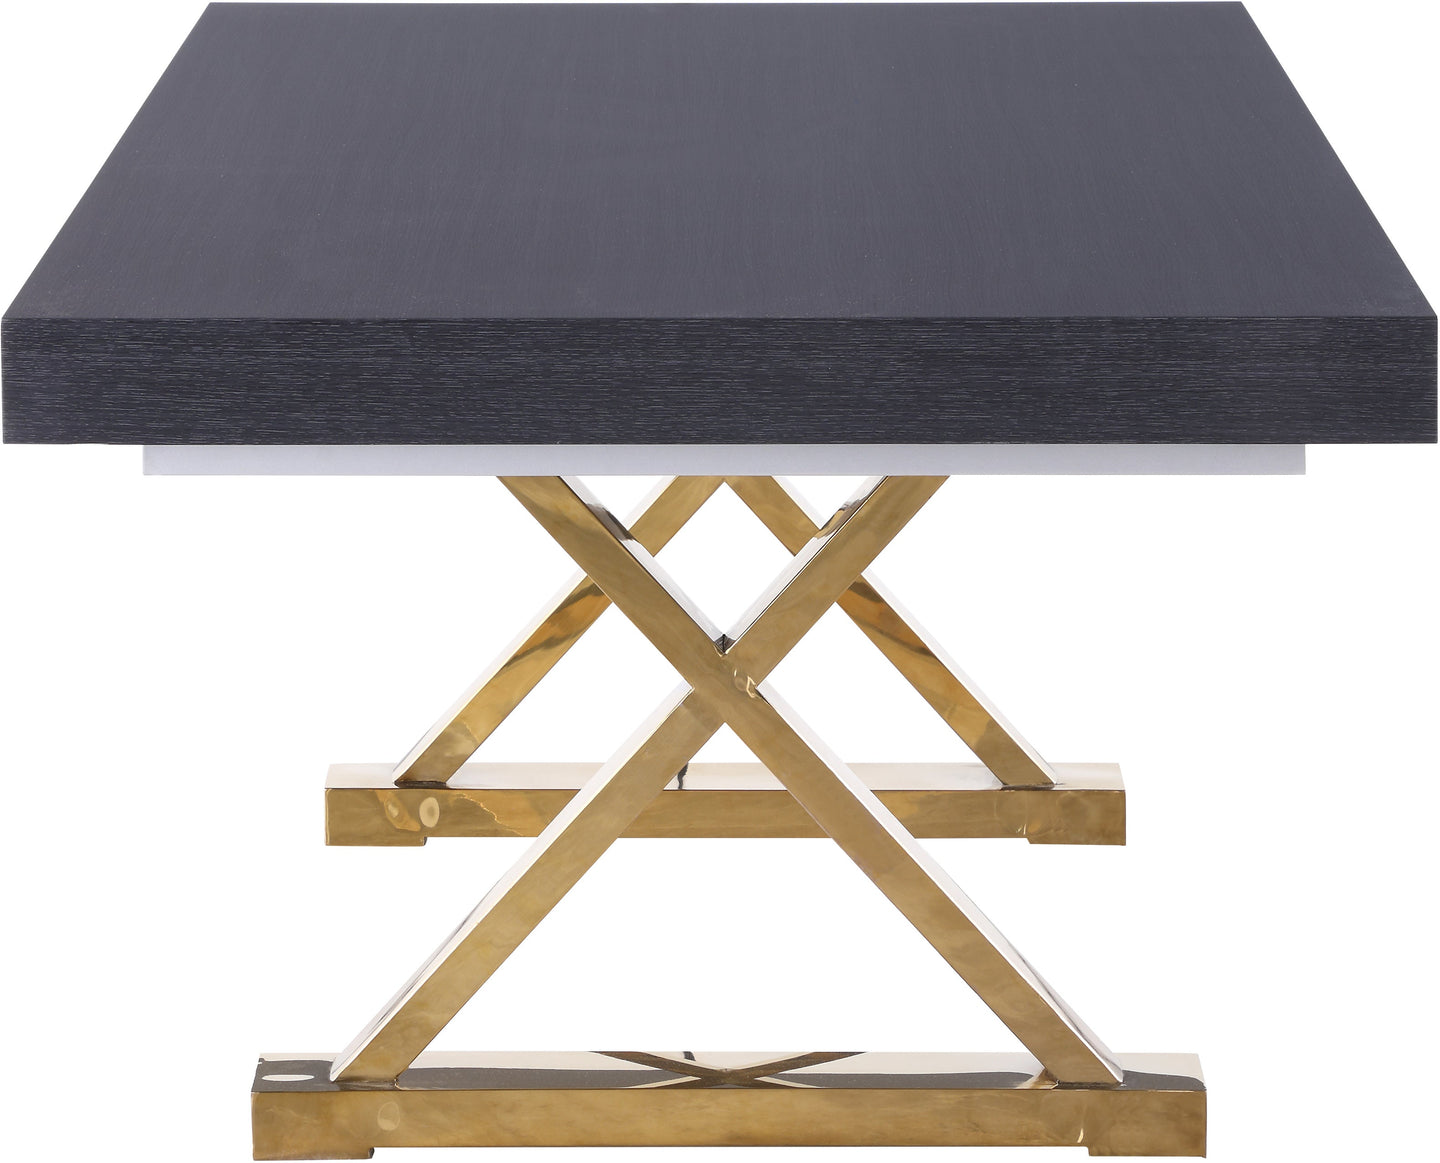 Excel Grey Oak Veneer Lacquer Extendable Dining Table (3 Boxes) - Furniture Depot (7679020925176)